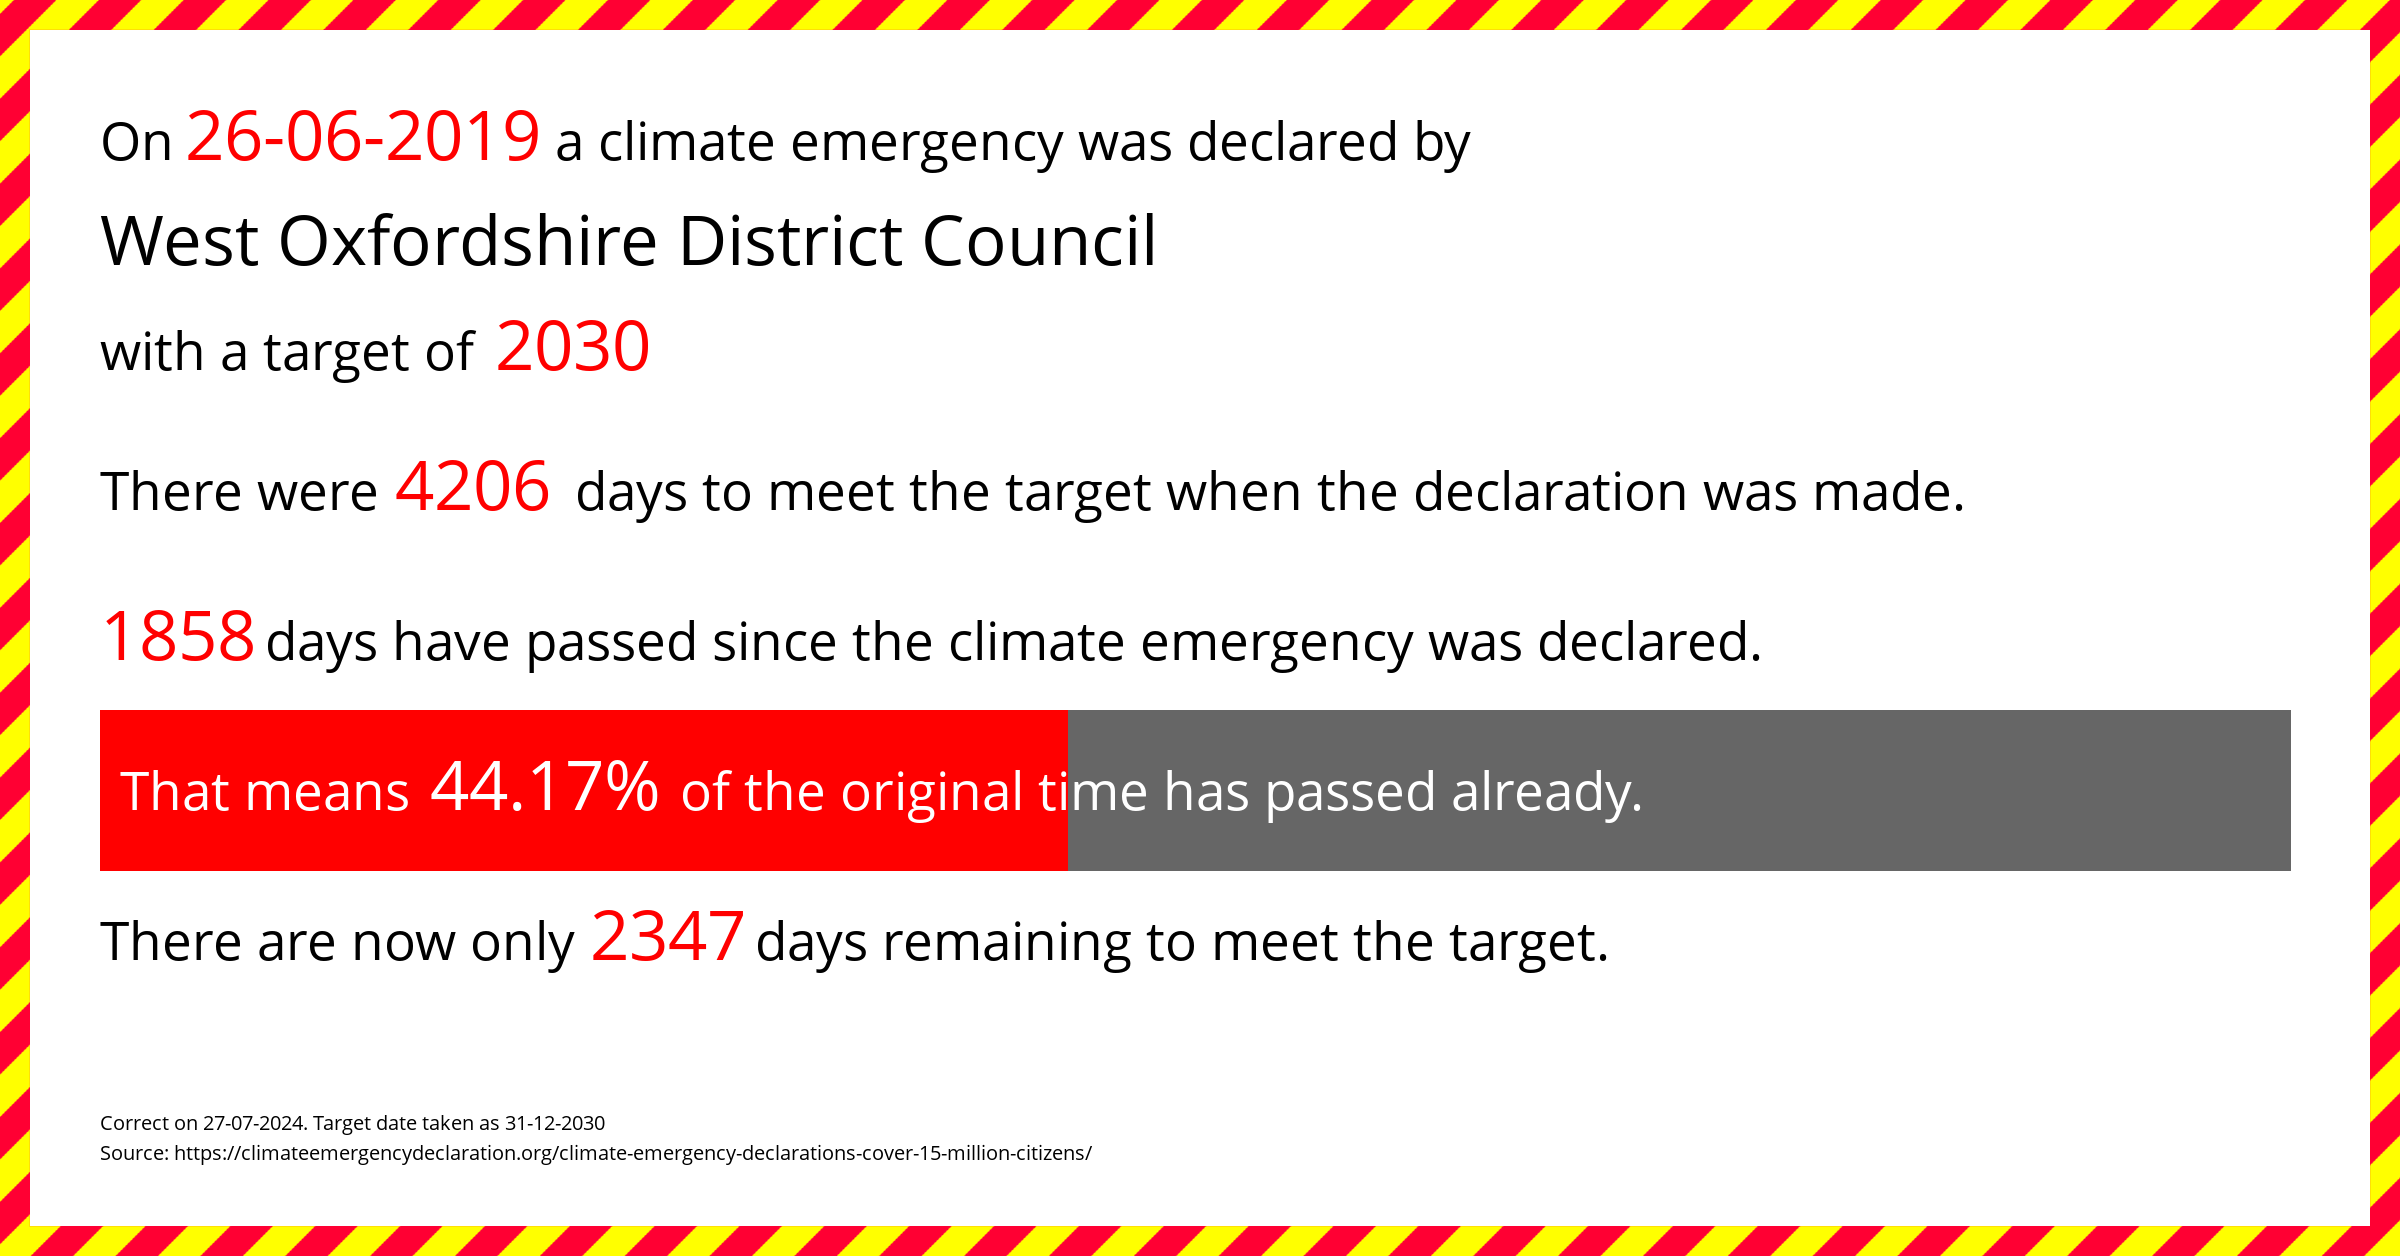 West Oxfordshire District Council declared a Climate emergency on Wednesday 26th June 2019, with a target of 2030.